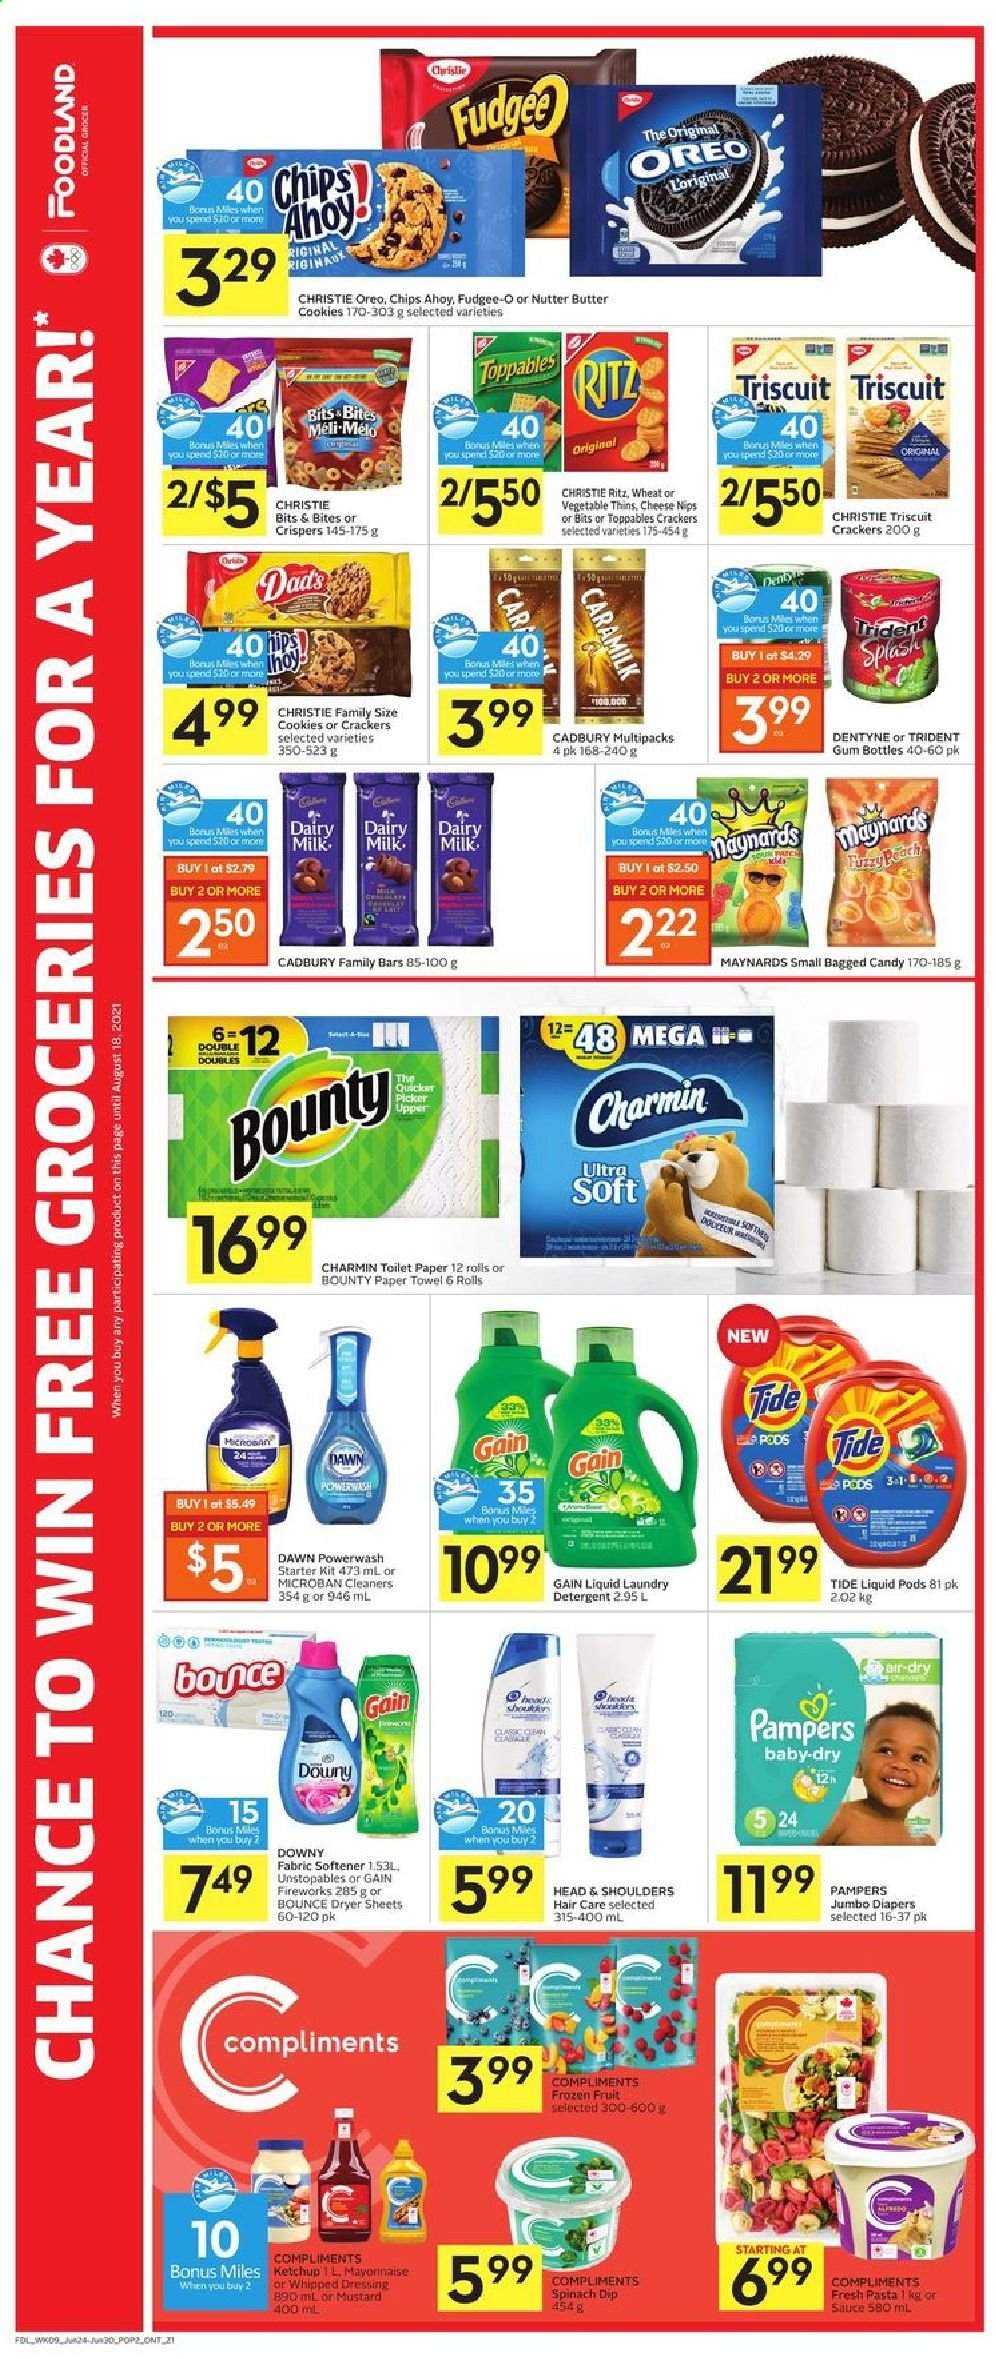 thumbnail - Circulaire Foodland - 24 Juin 2021 - 30 Juin 2021 - Produits soldés - Oreo, mayonnaise, cookies, chips, crackers, détergent, Head & Shoulders, Pampers. Page 3.